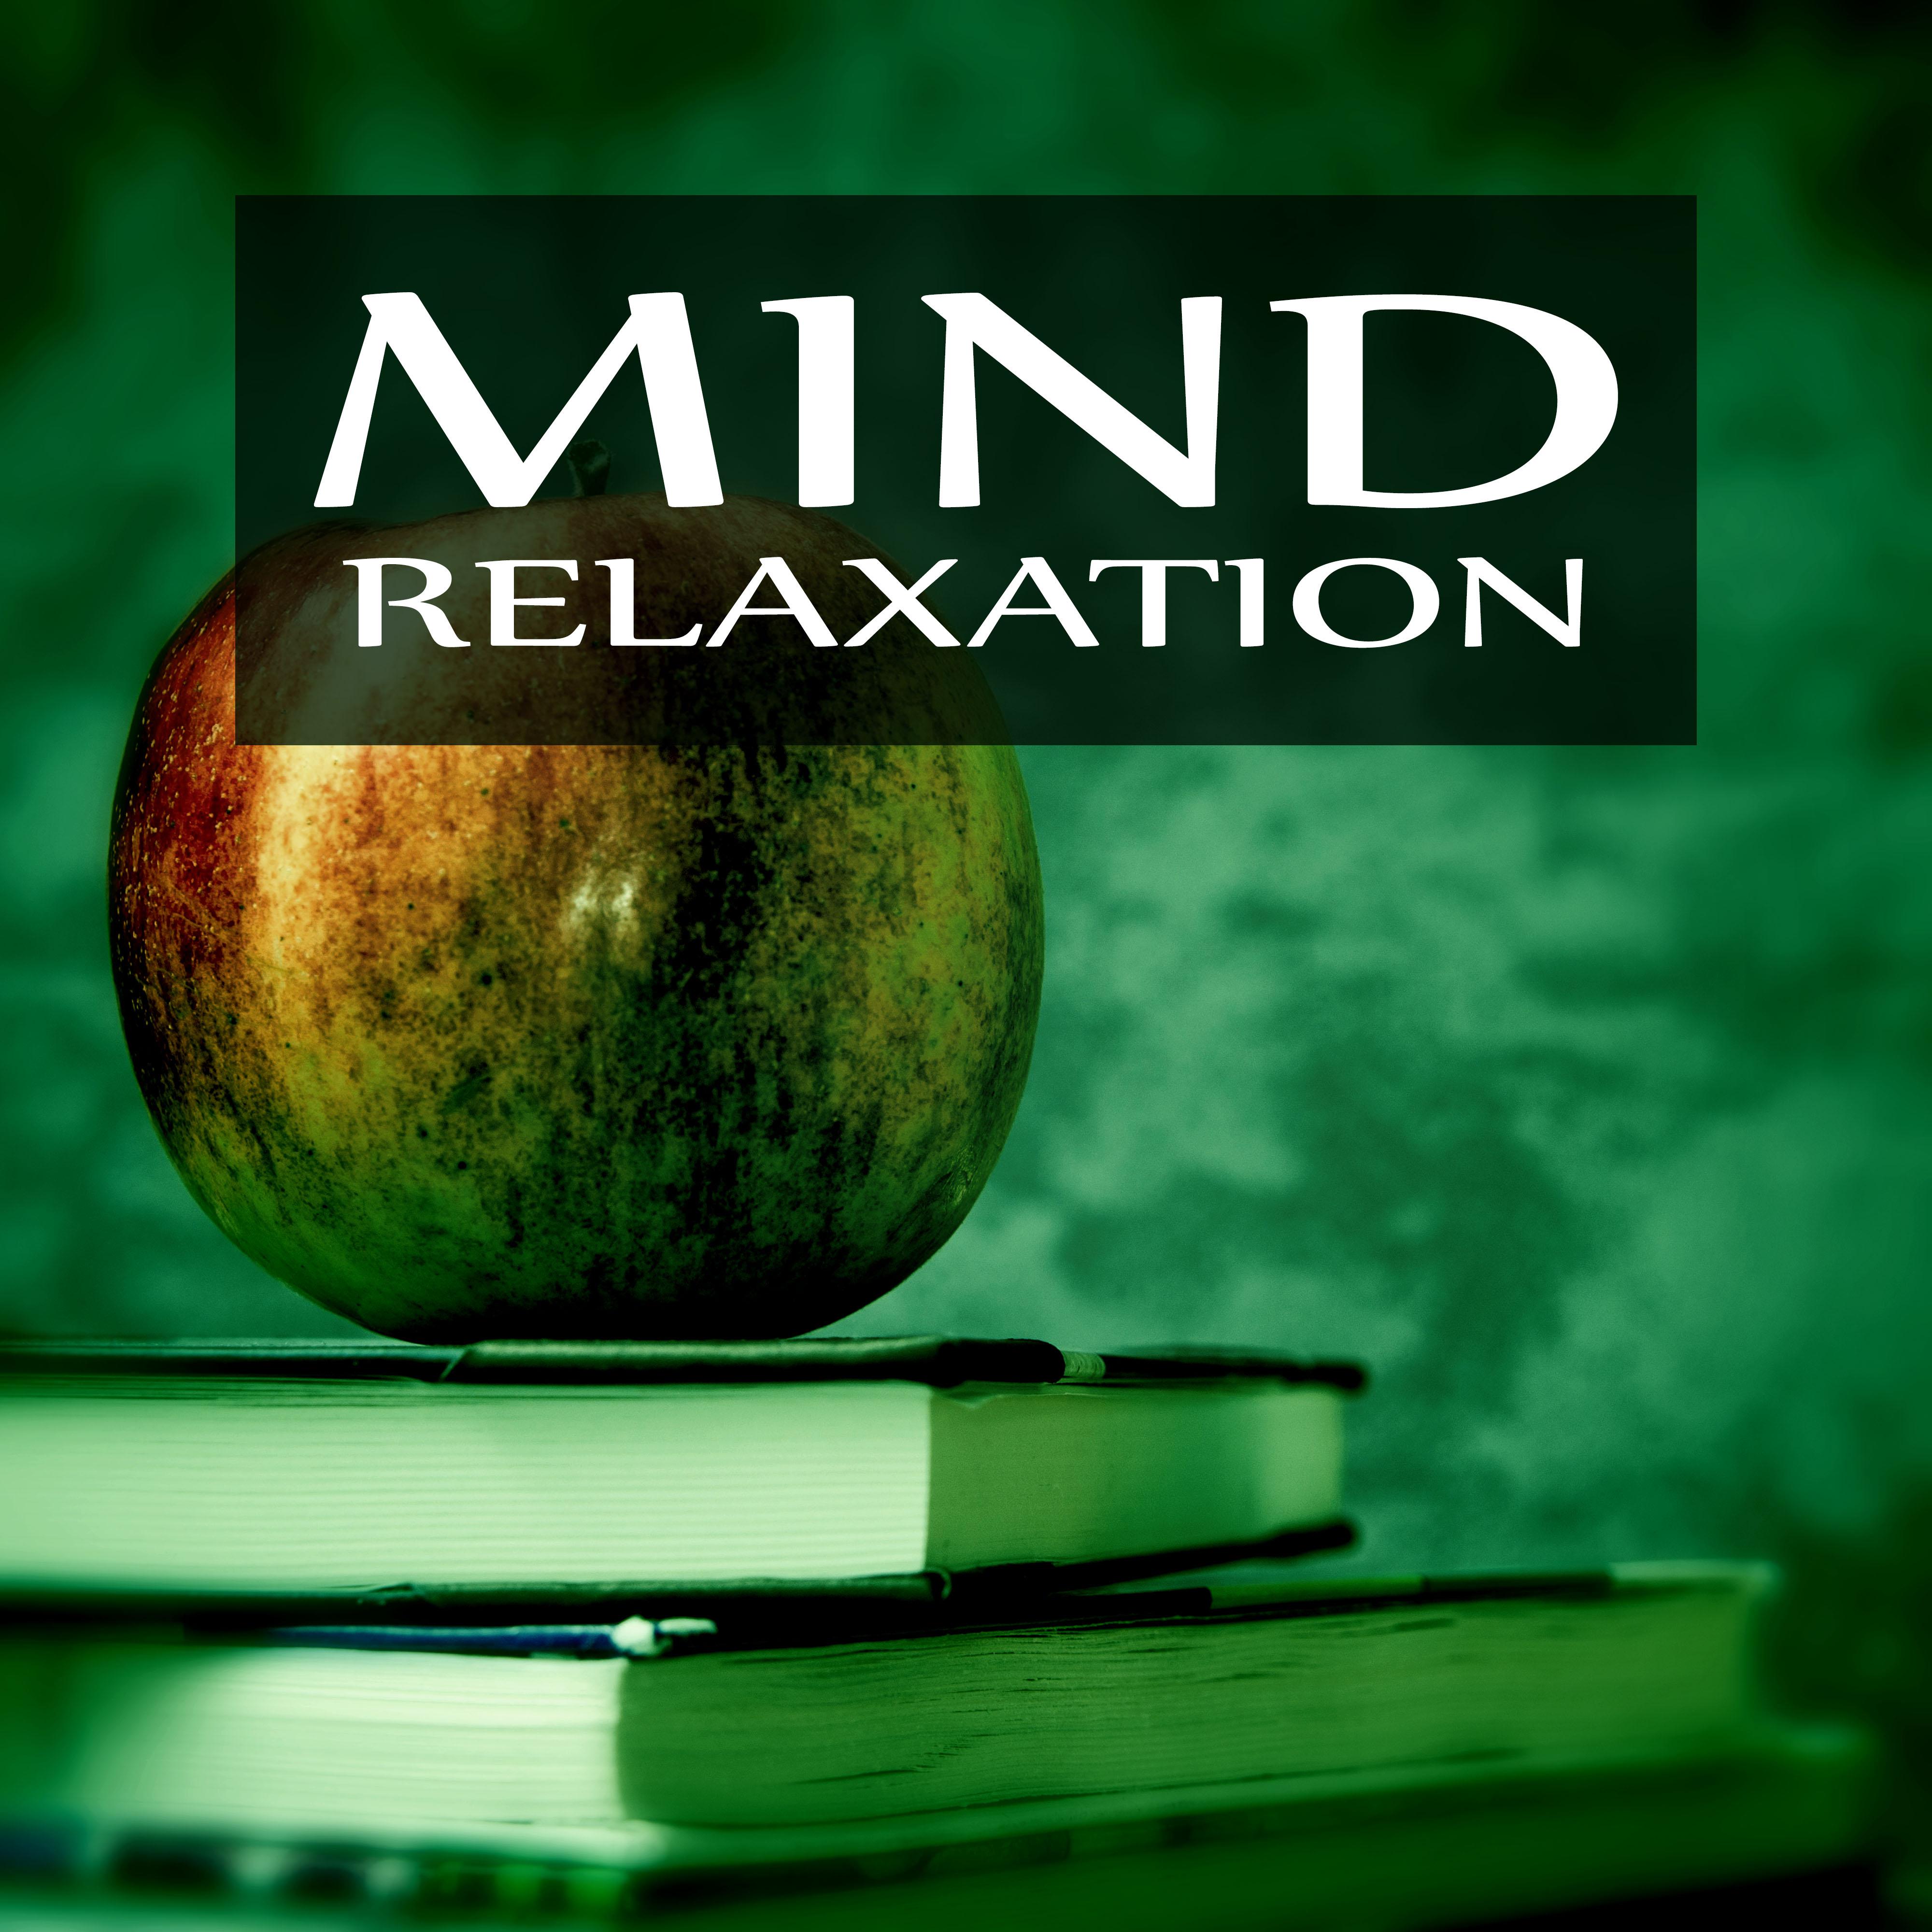 Mind Relaxation - Focus on Learning, Relax Your Eyes, Time for Study, Music for Concentration